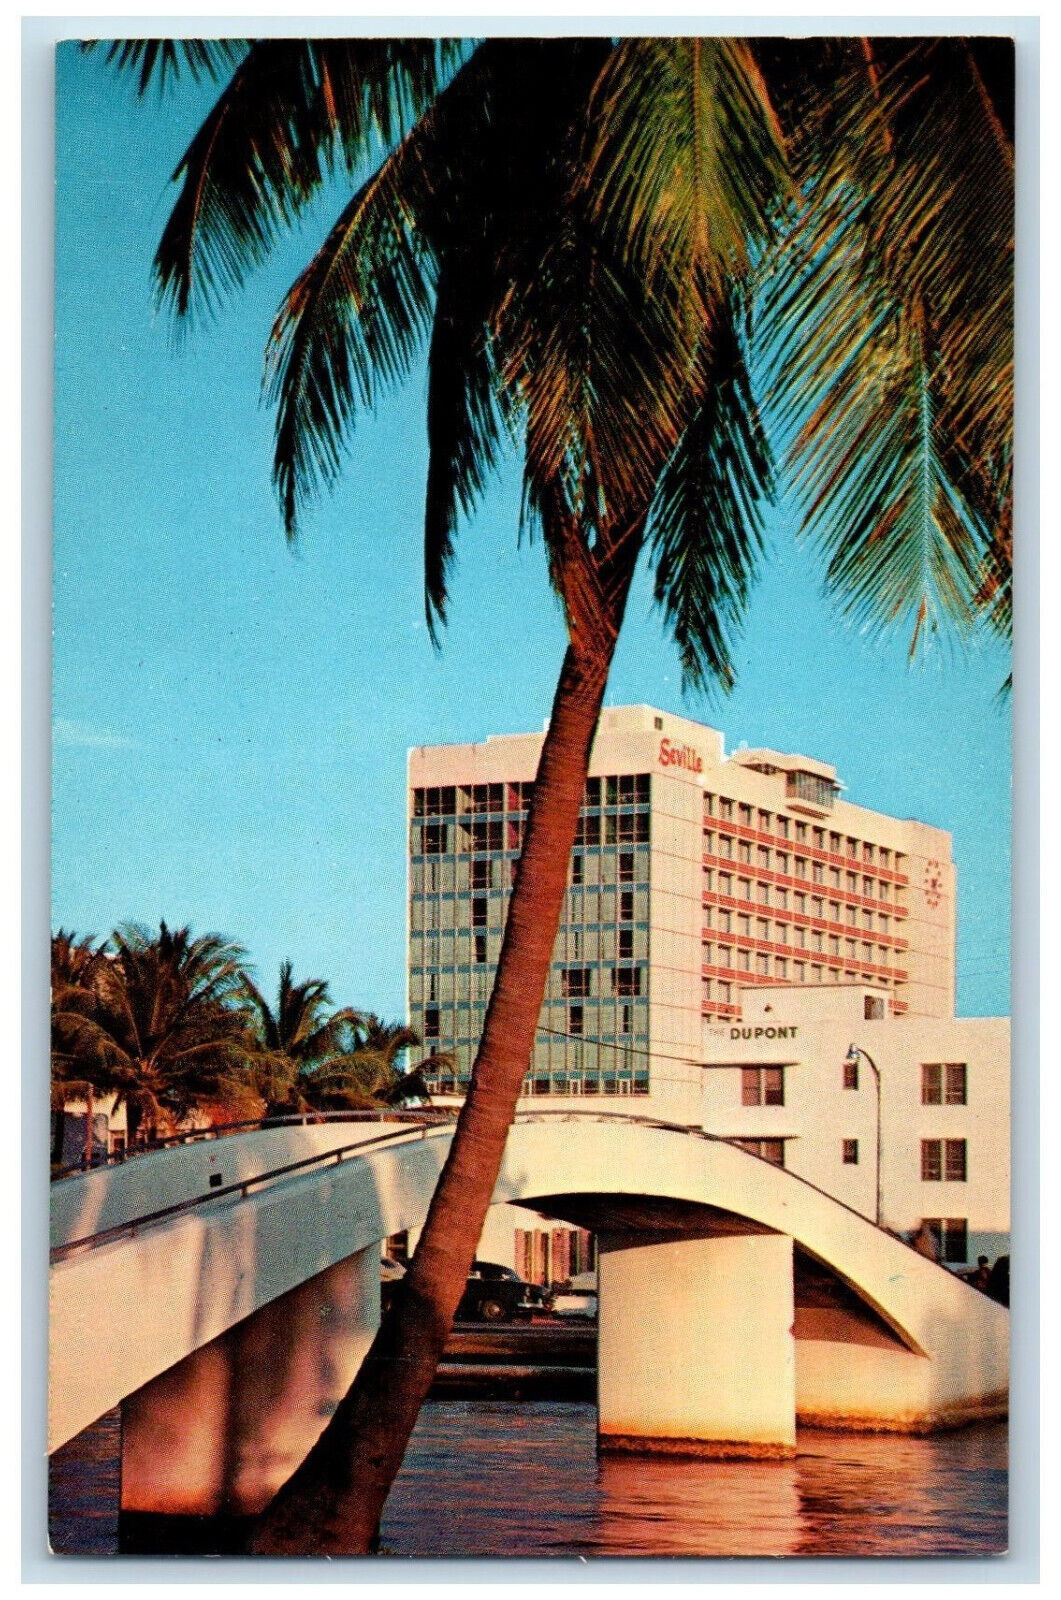 c1960's Nestled in the Palms is the Seville Hotel, Miami Beach FL Postcard